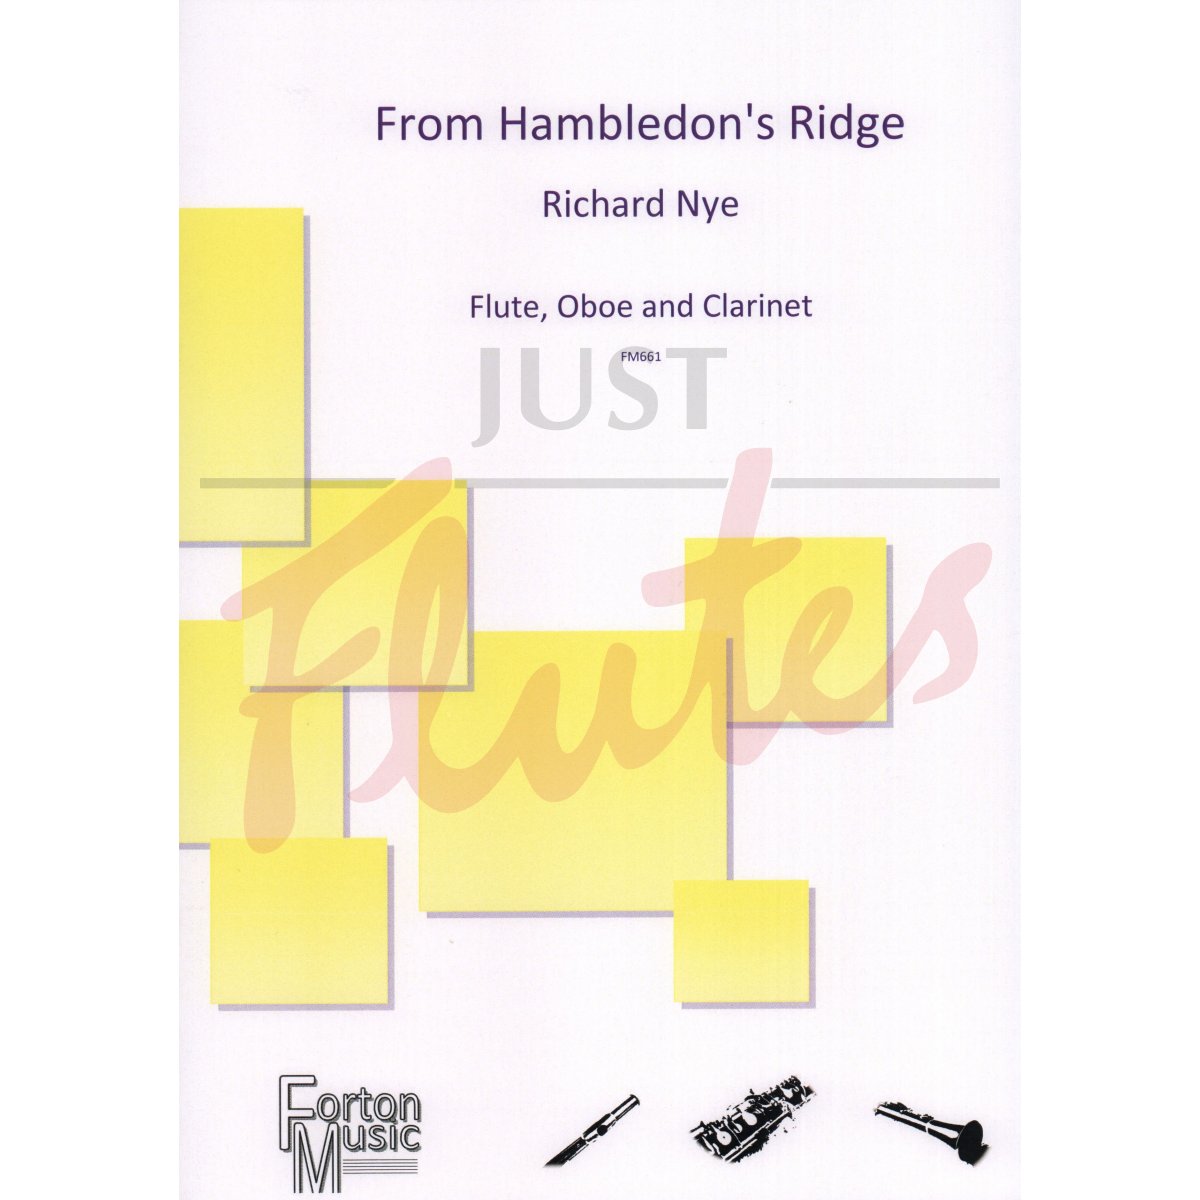 From Hambledon's Ridge for Flute, Oboe and Clarinet